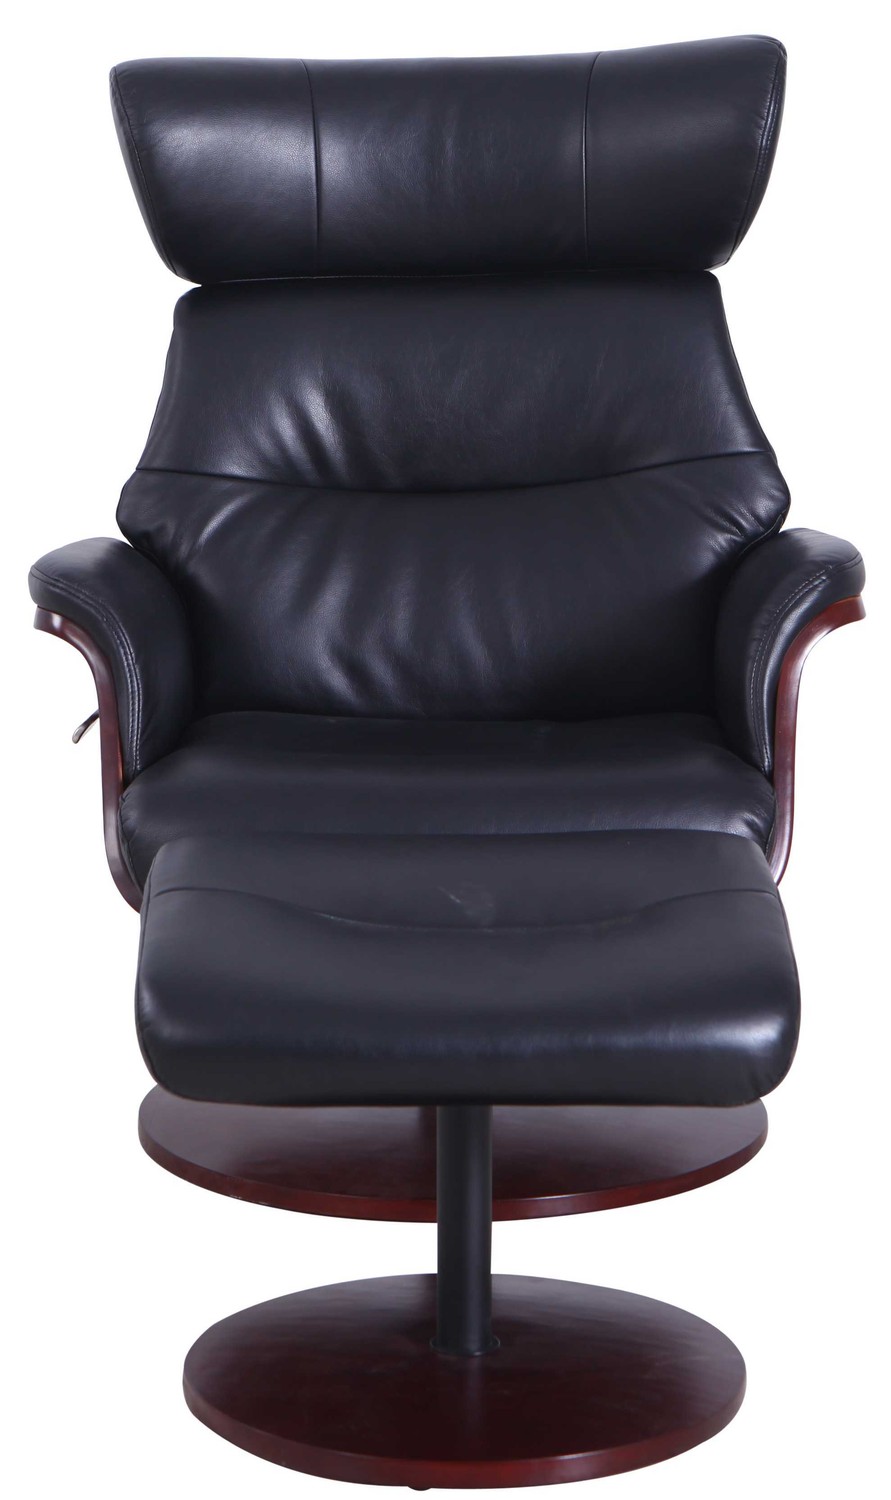 Black Onyx Faux Leather Memory Foam Recliner and Ottoman Set